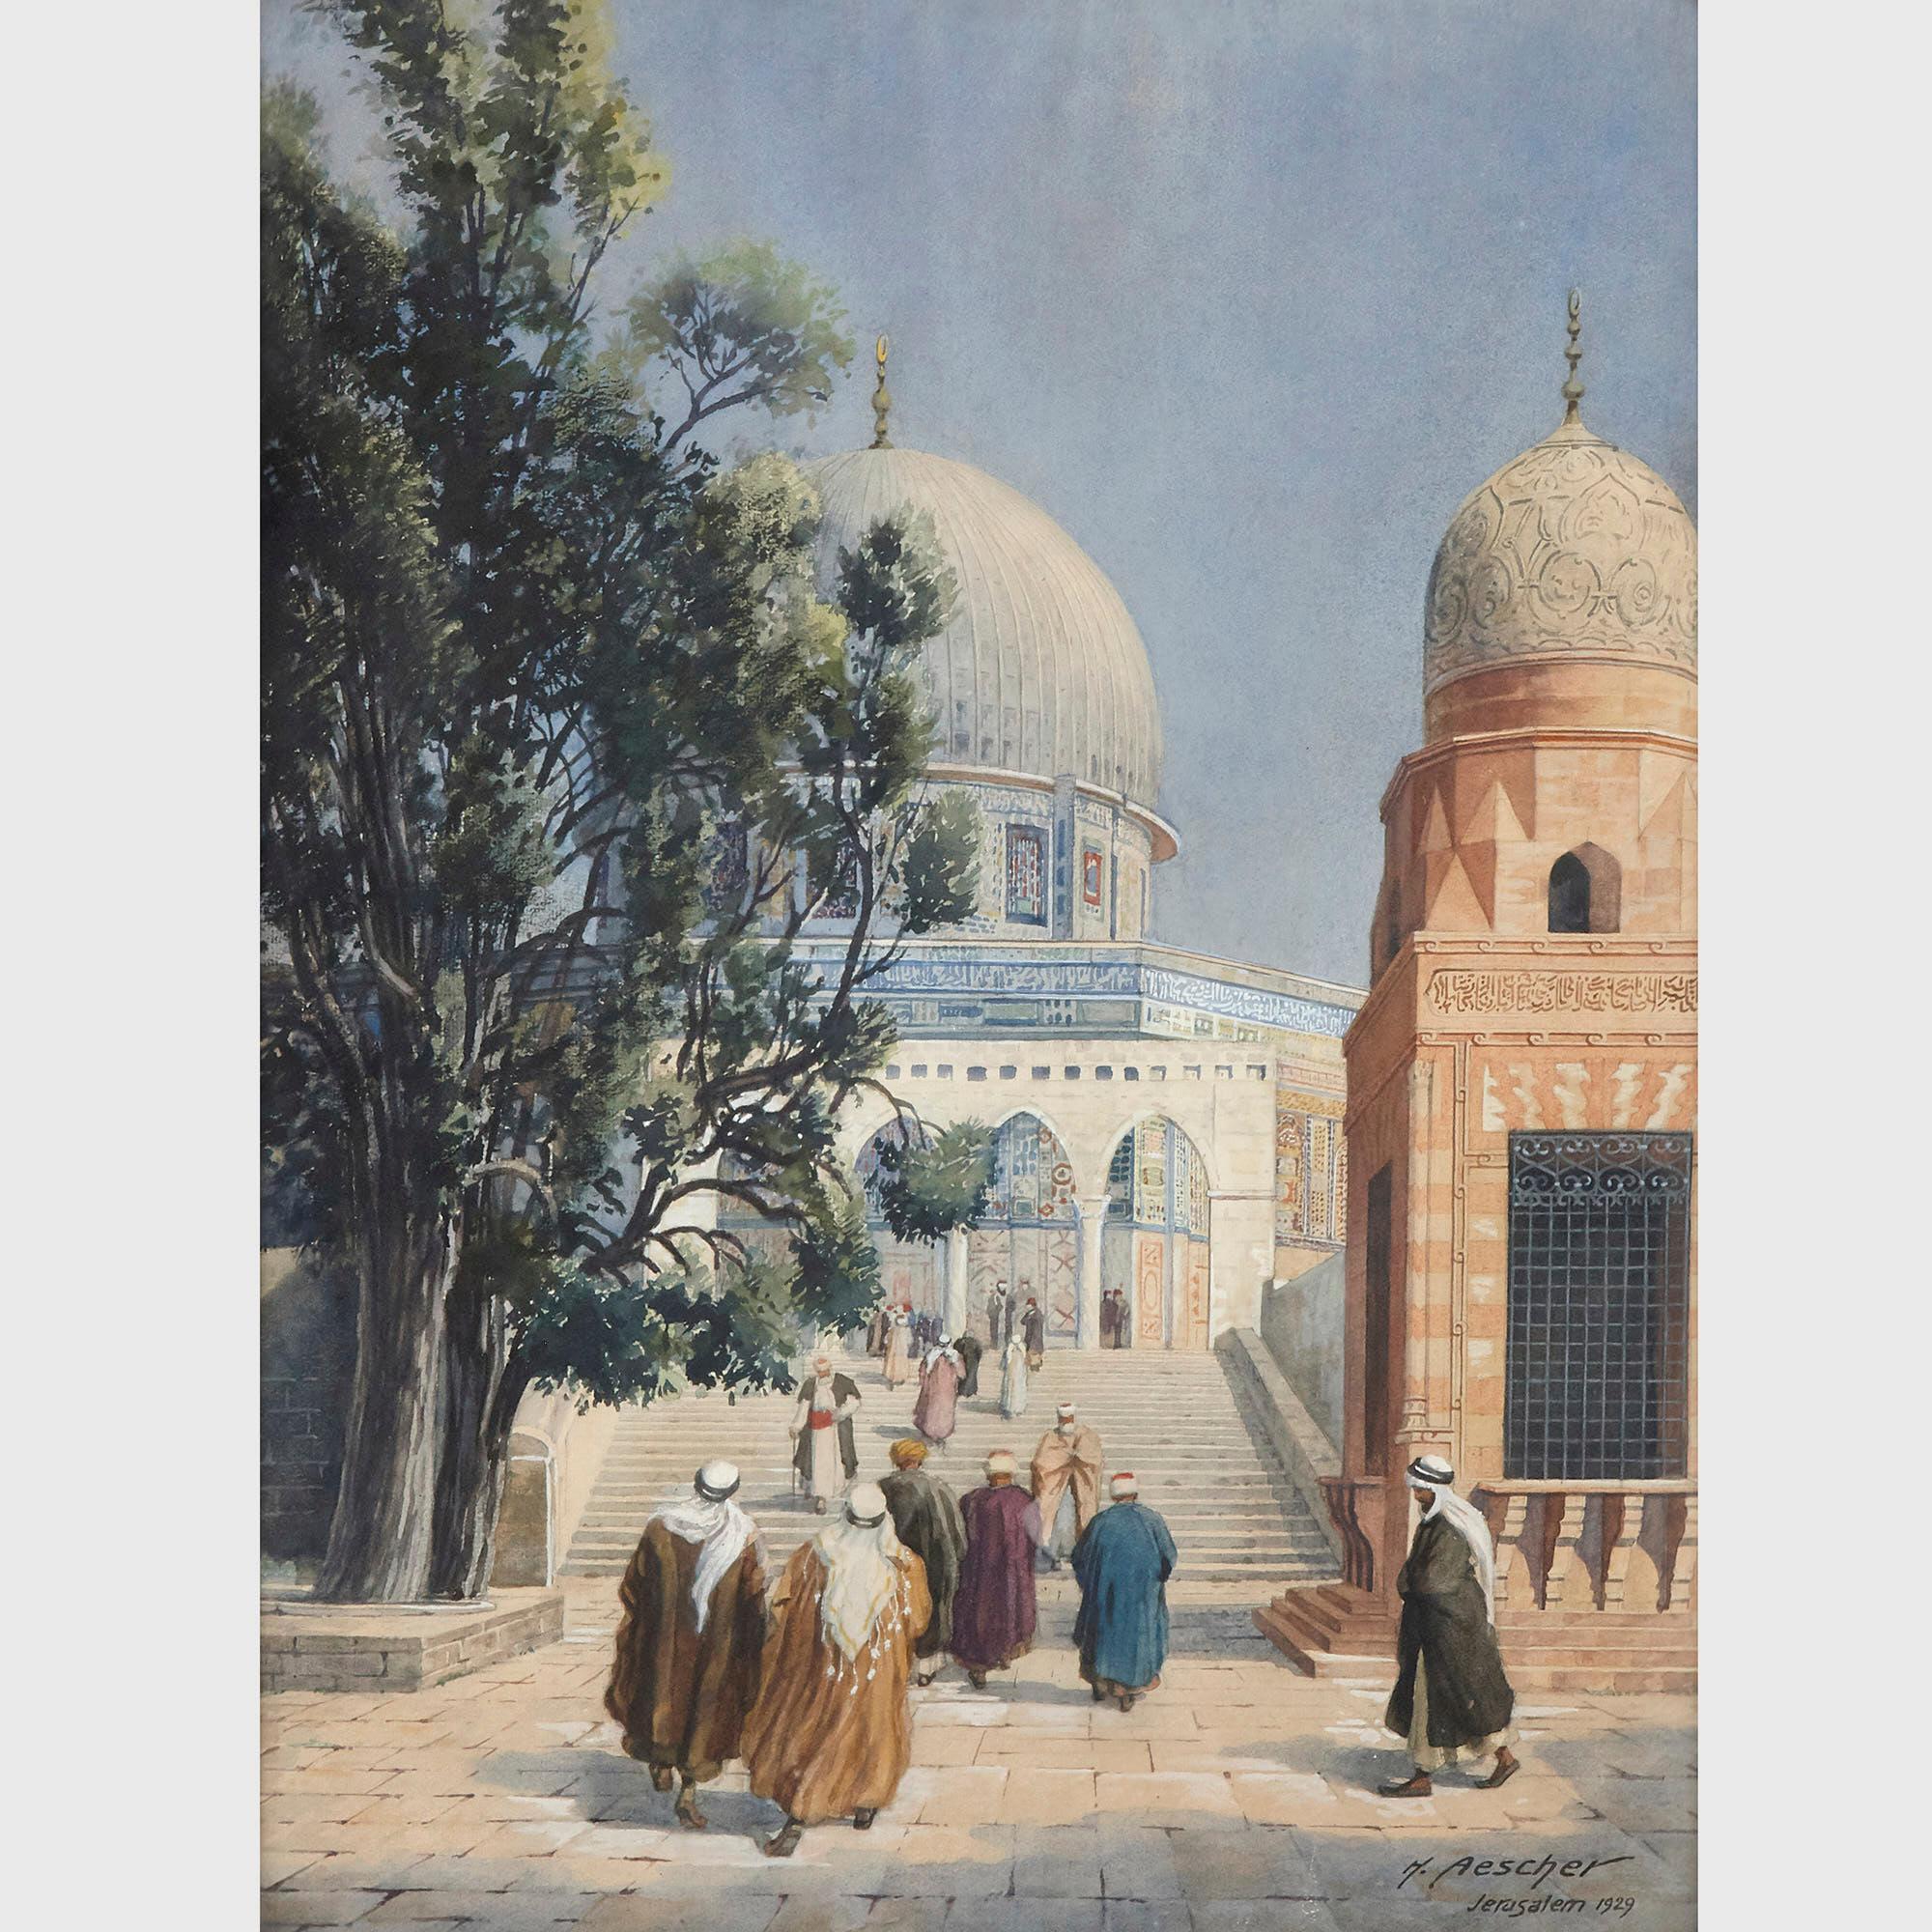 This impressive watercolour depicts the Dome of the Rock in Jerusalem. The Dome is visible behind a pointed-arch screen, at the top of a staircase upon which figures traverse to and from the mosque. These figures were Middle Eastern dress,